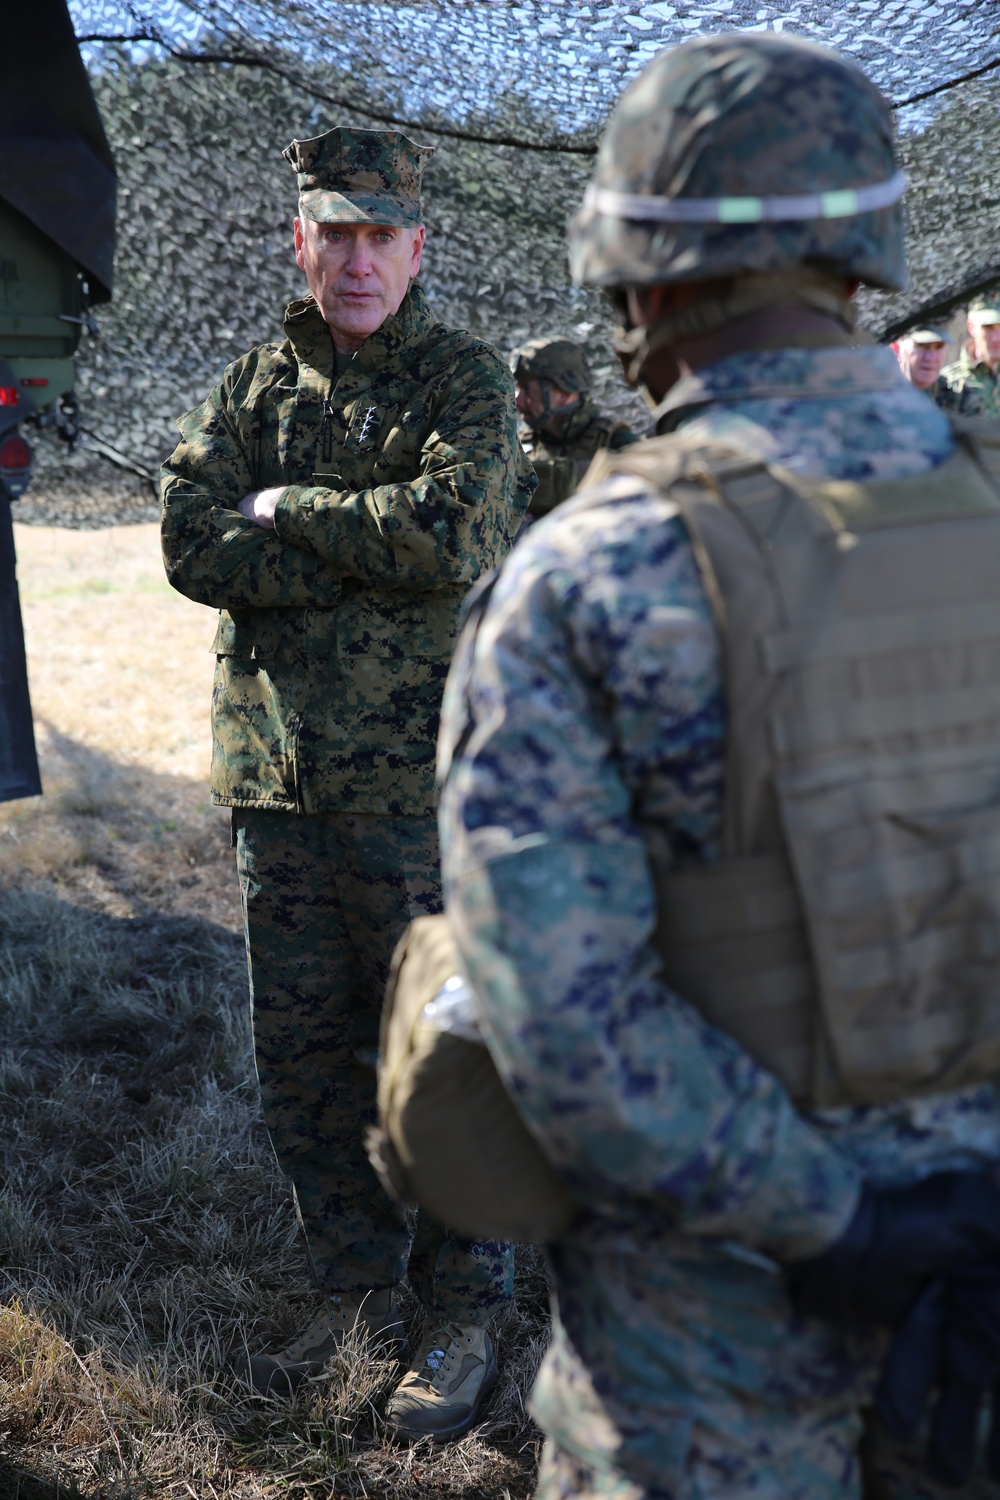 Commandant of the Marine Corps visits Integrated Task Force Marines